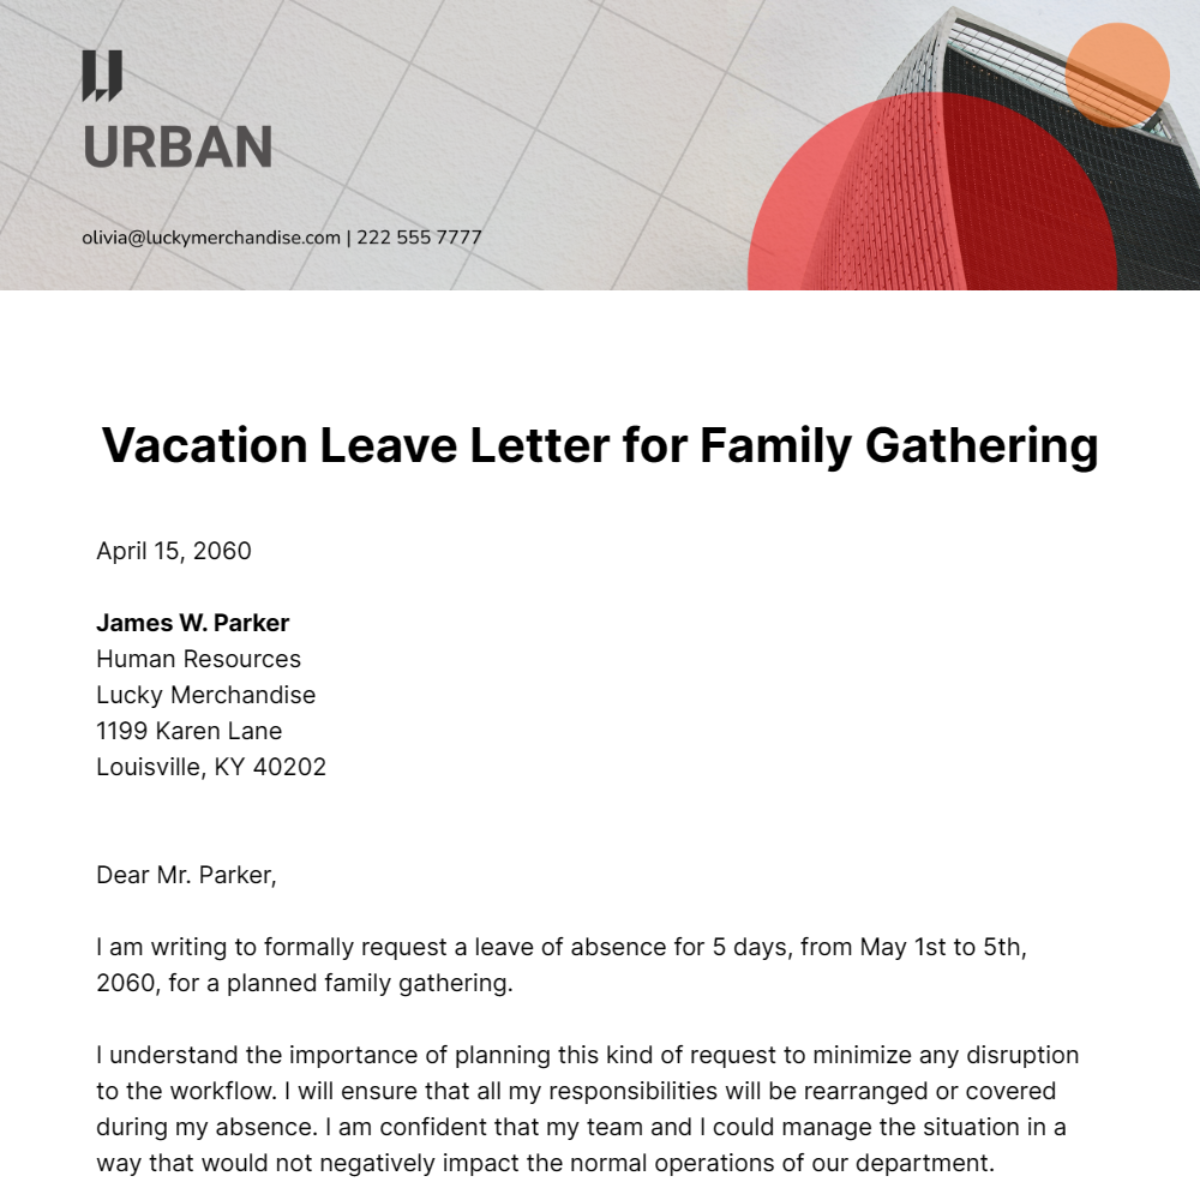 Vacation Leave Letter for Family Gathering Template